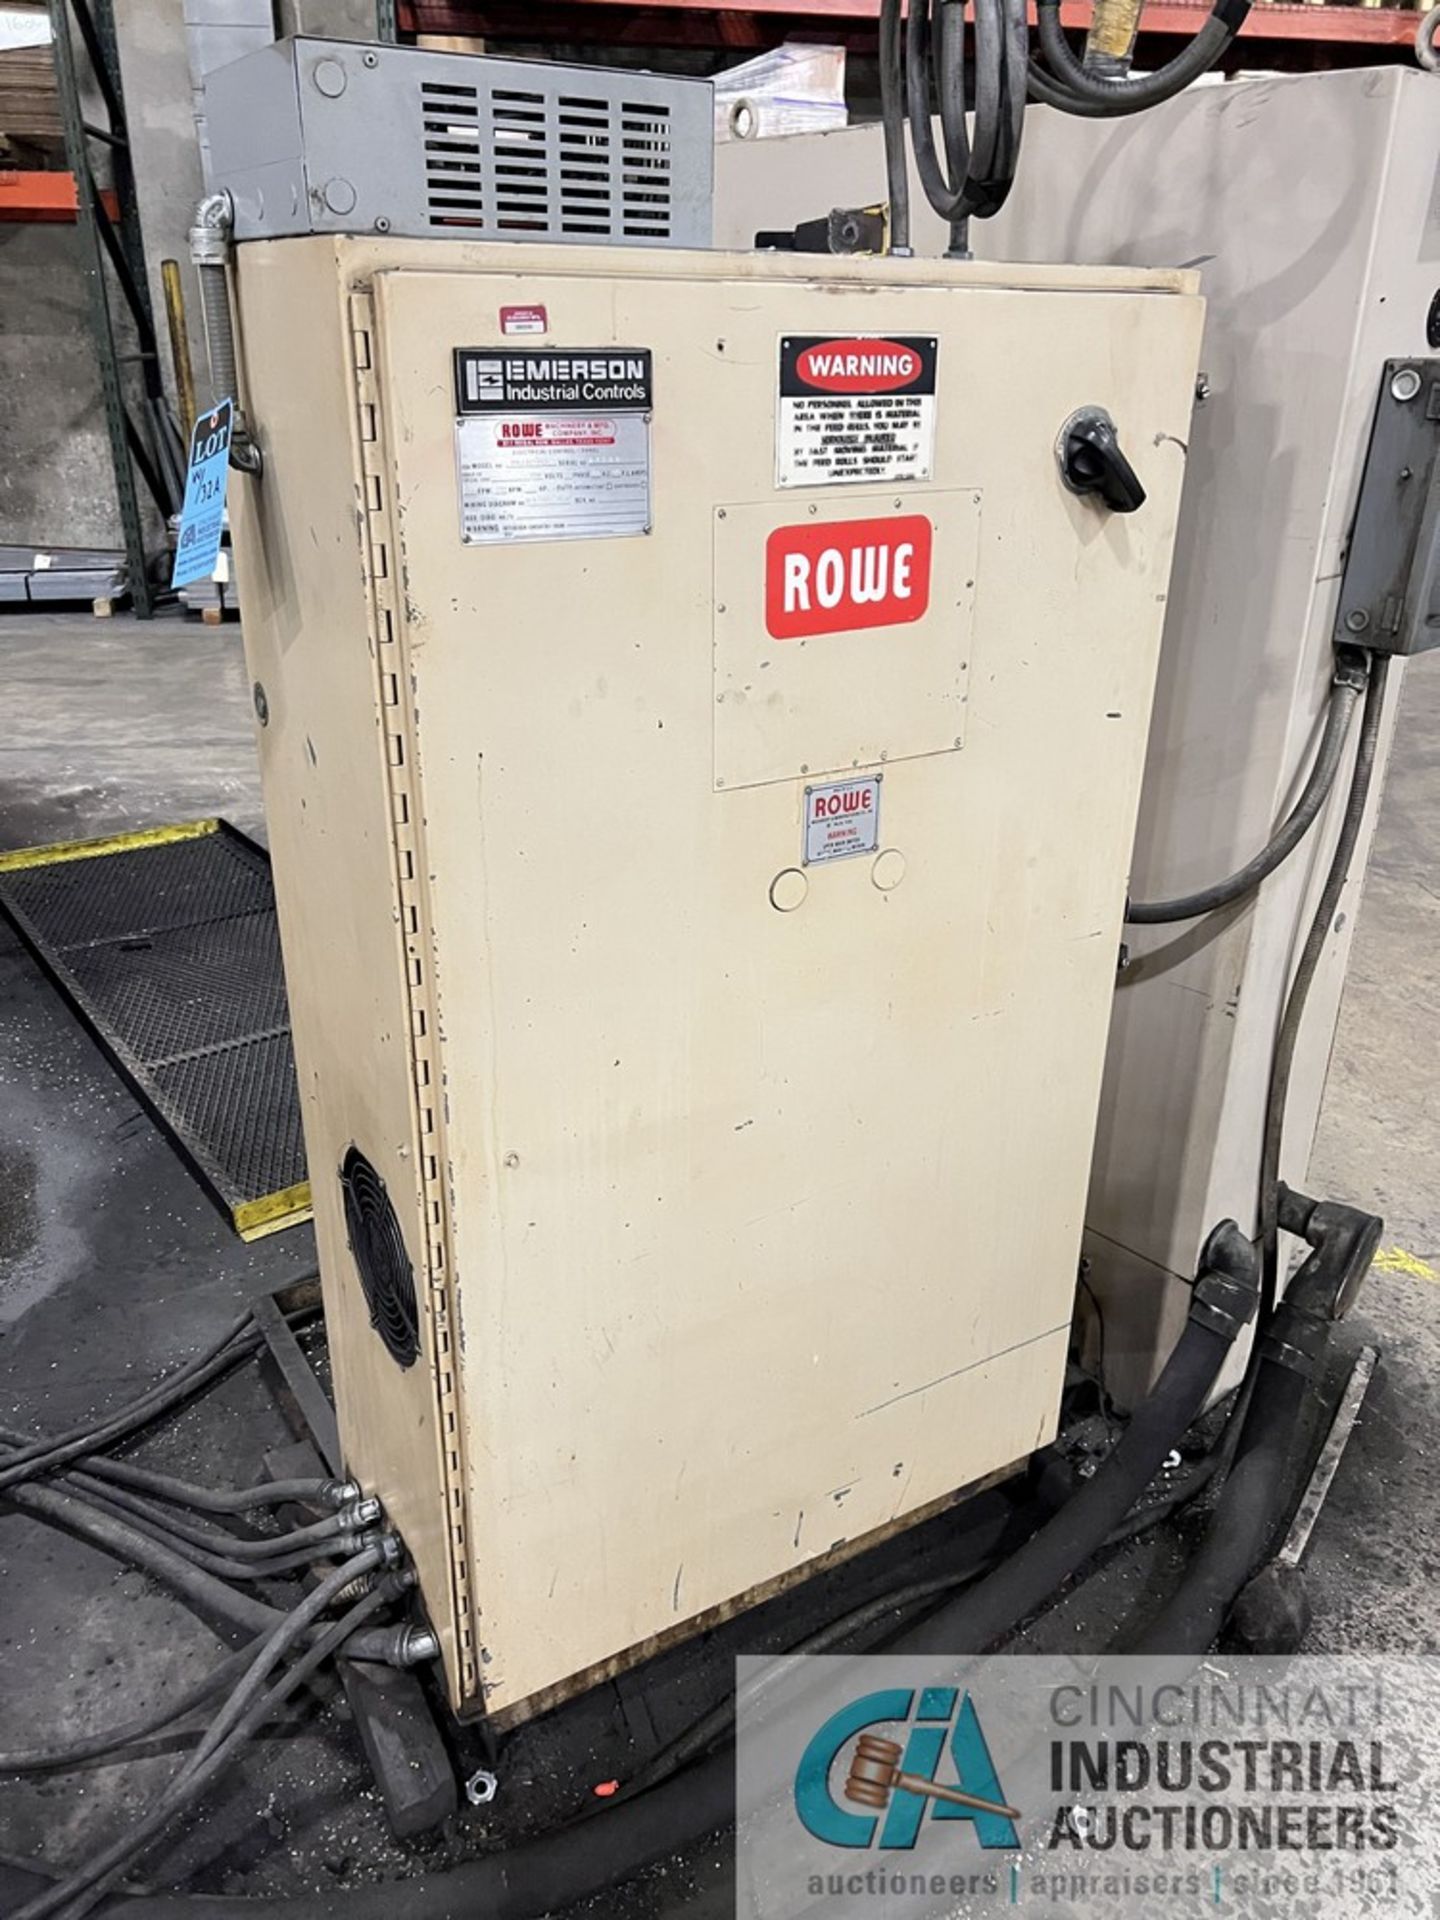 ROWE MODEL PM-FDC-050-220 ELECTRONIC ROLL FEED, 22" MAX WIDTH CAPACITY, STATE ELECTRIC COMPANY - Image 4 of 6